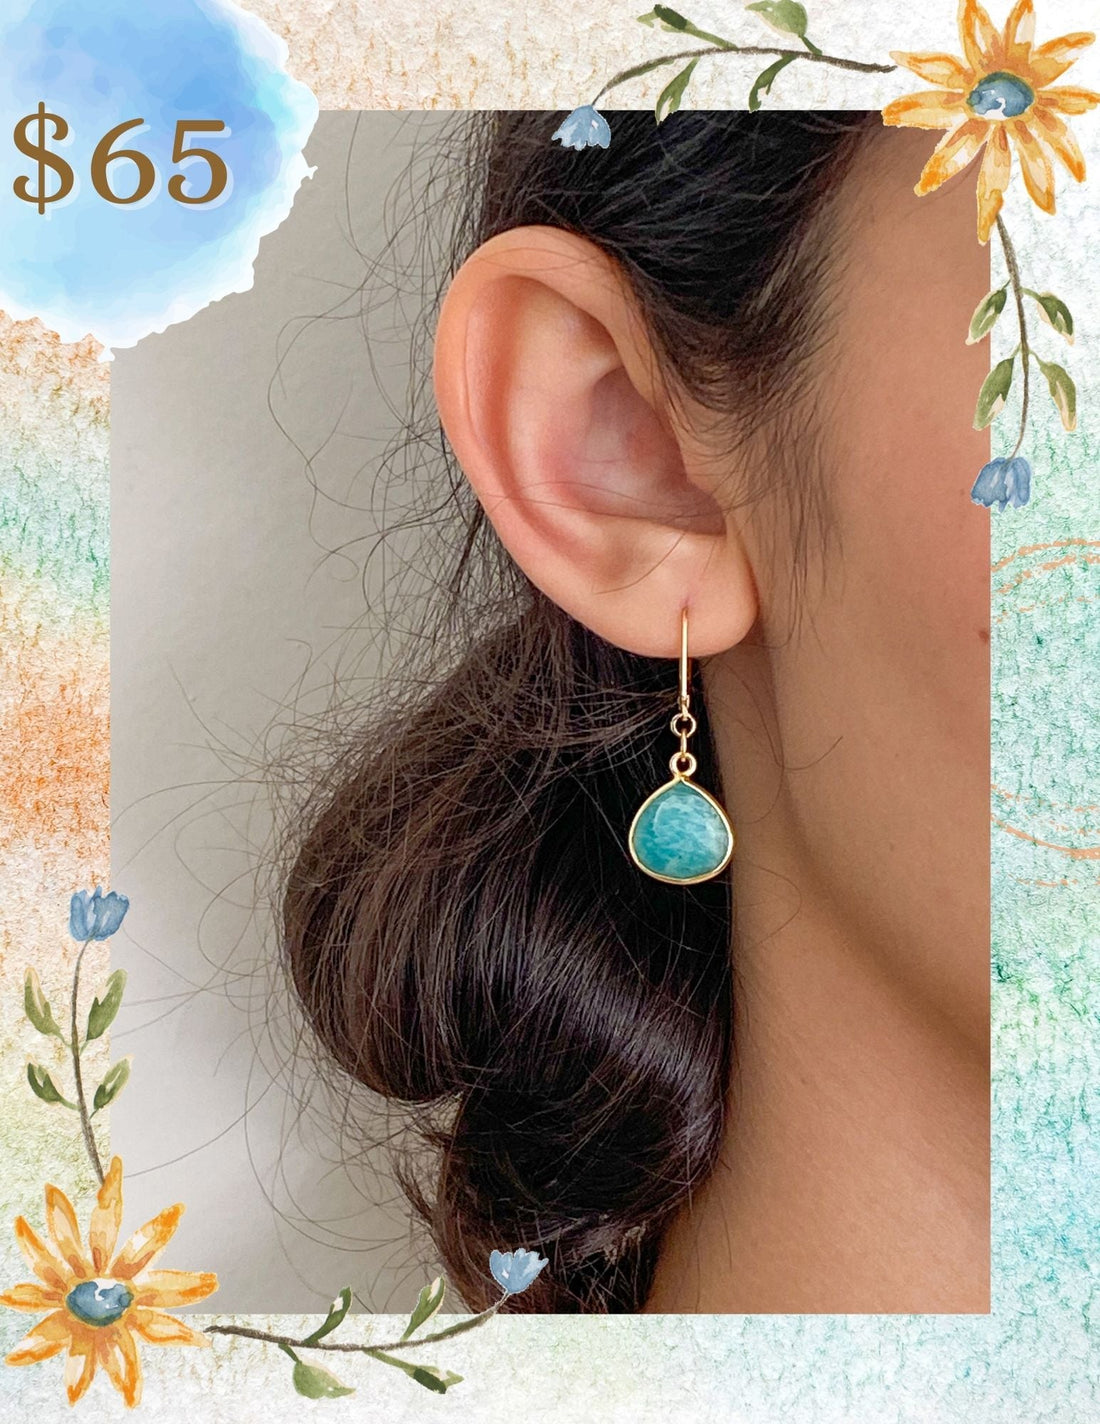 Amazonite Charm Gold Earrings by Sage Machado - The Sage Lifestyle